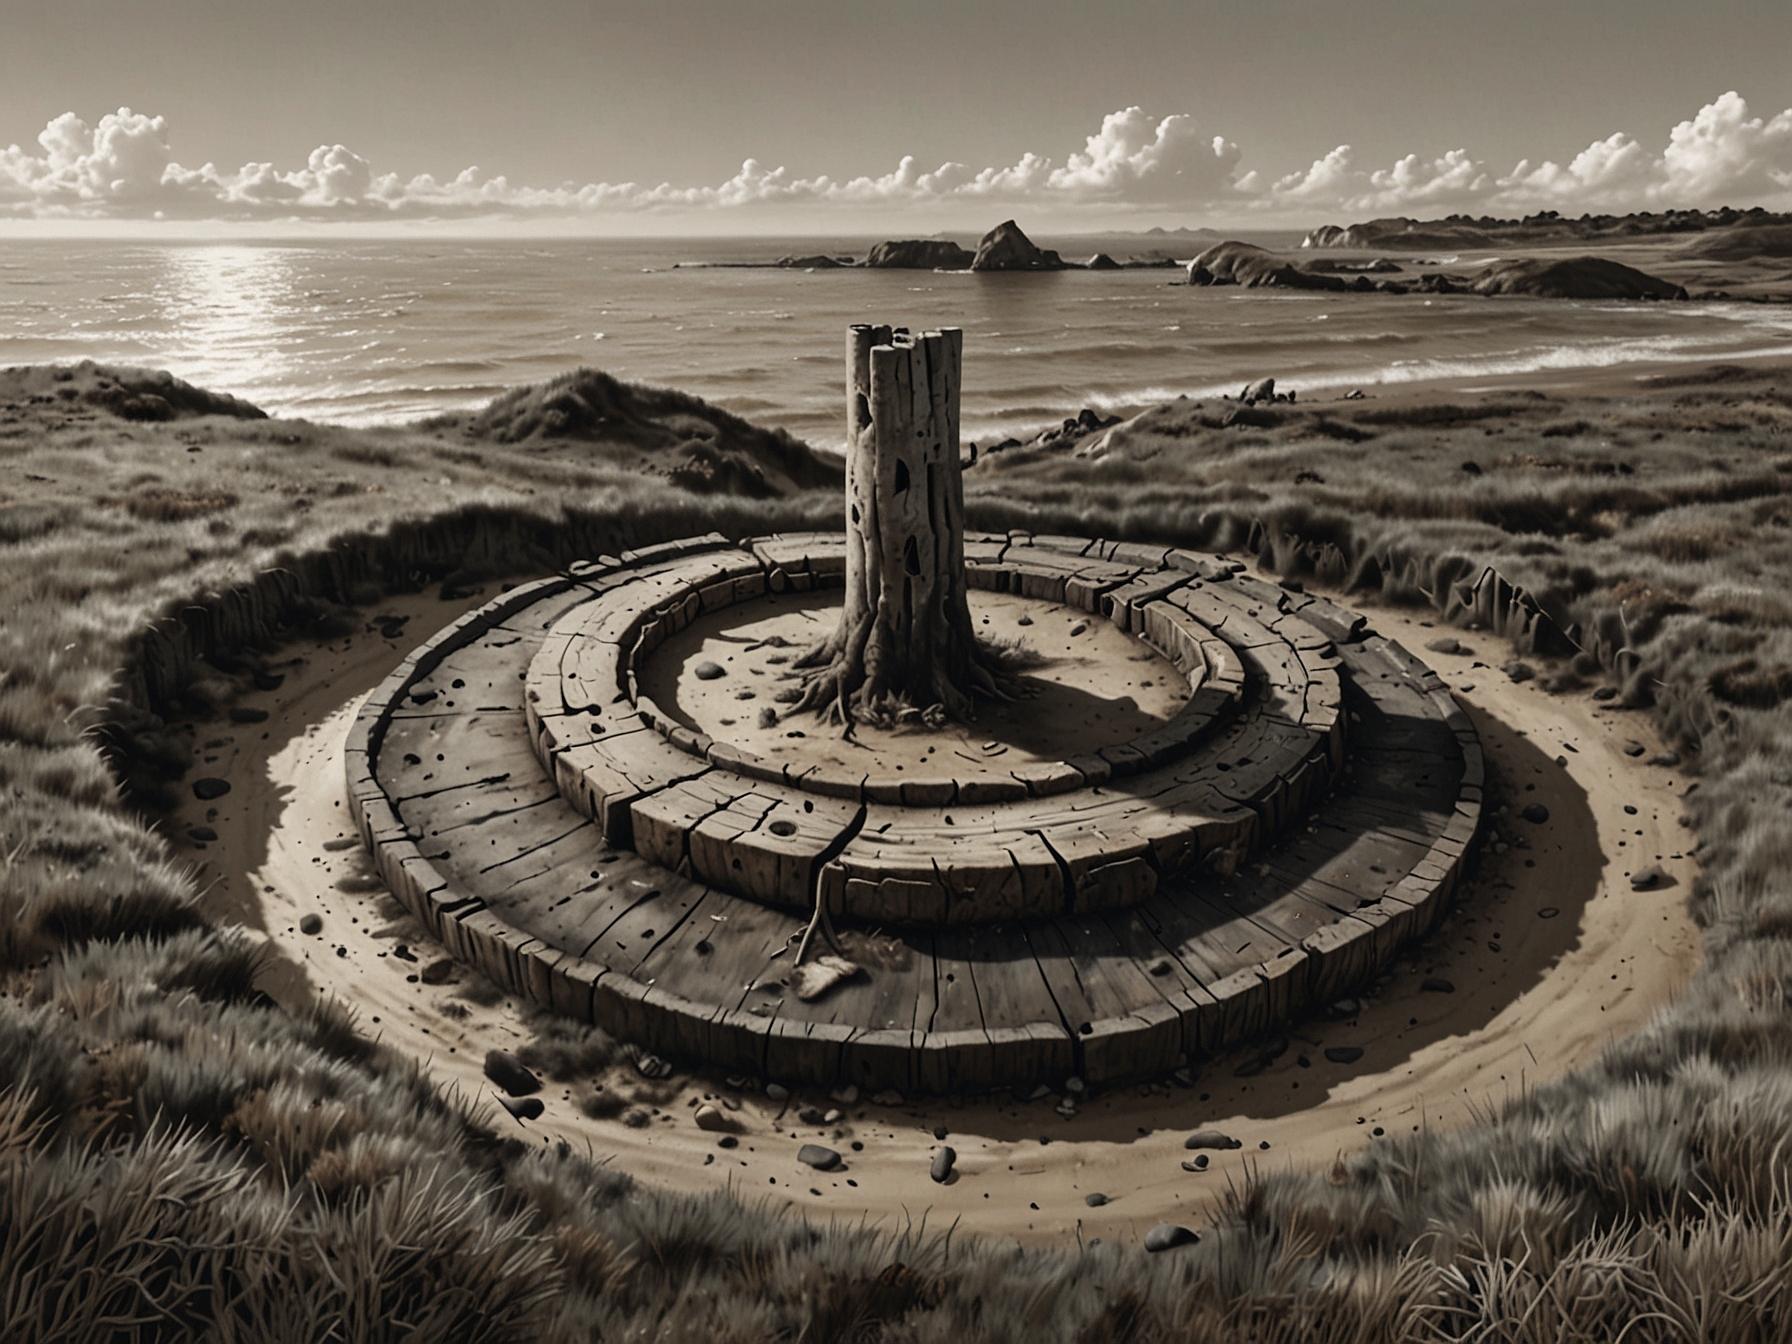 An aerial view of the ancient Seahenge site, showing the upturned tree stump surrounded by a timber circle, with the scenic Norfolk coastline in the background.